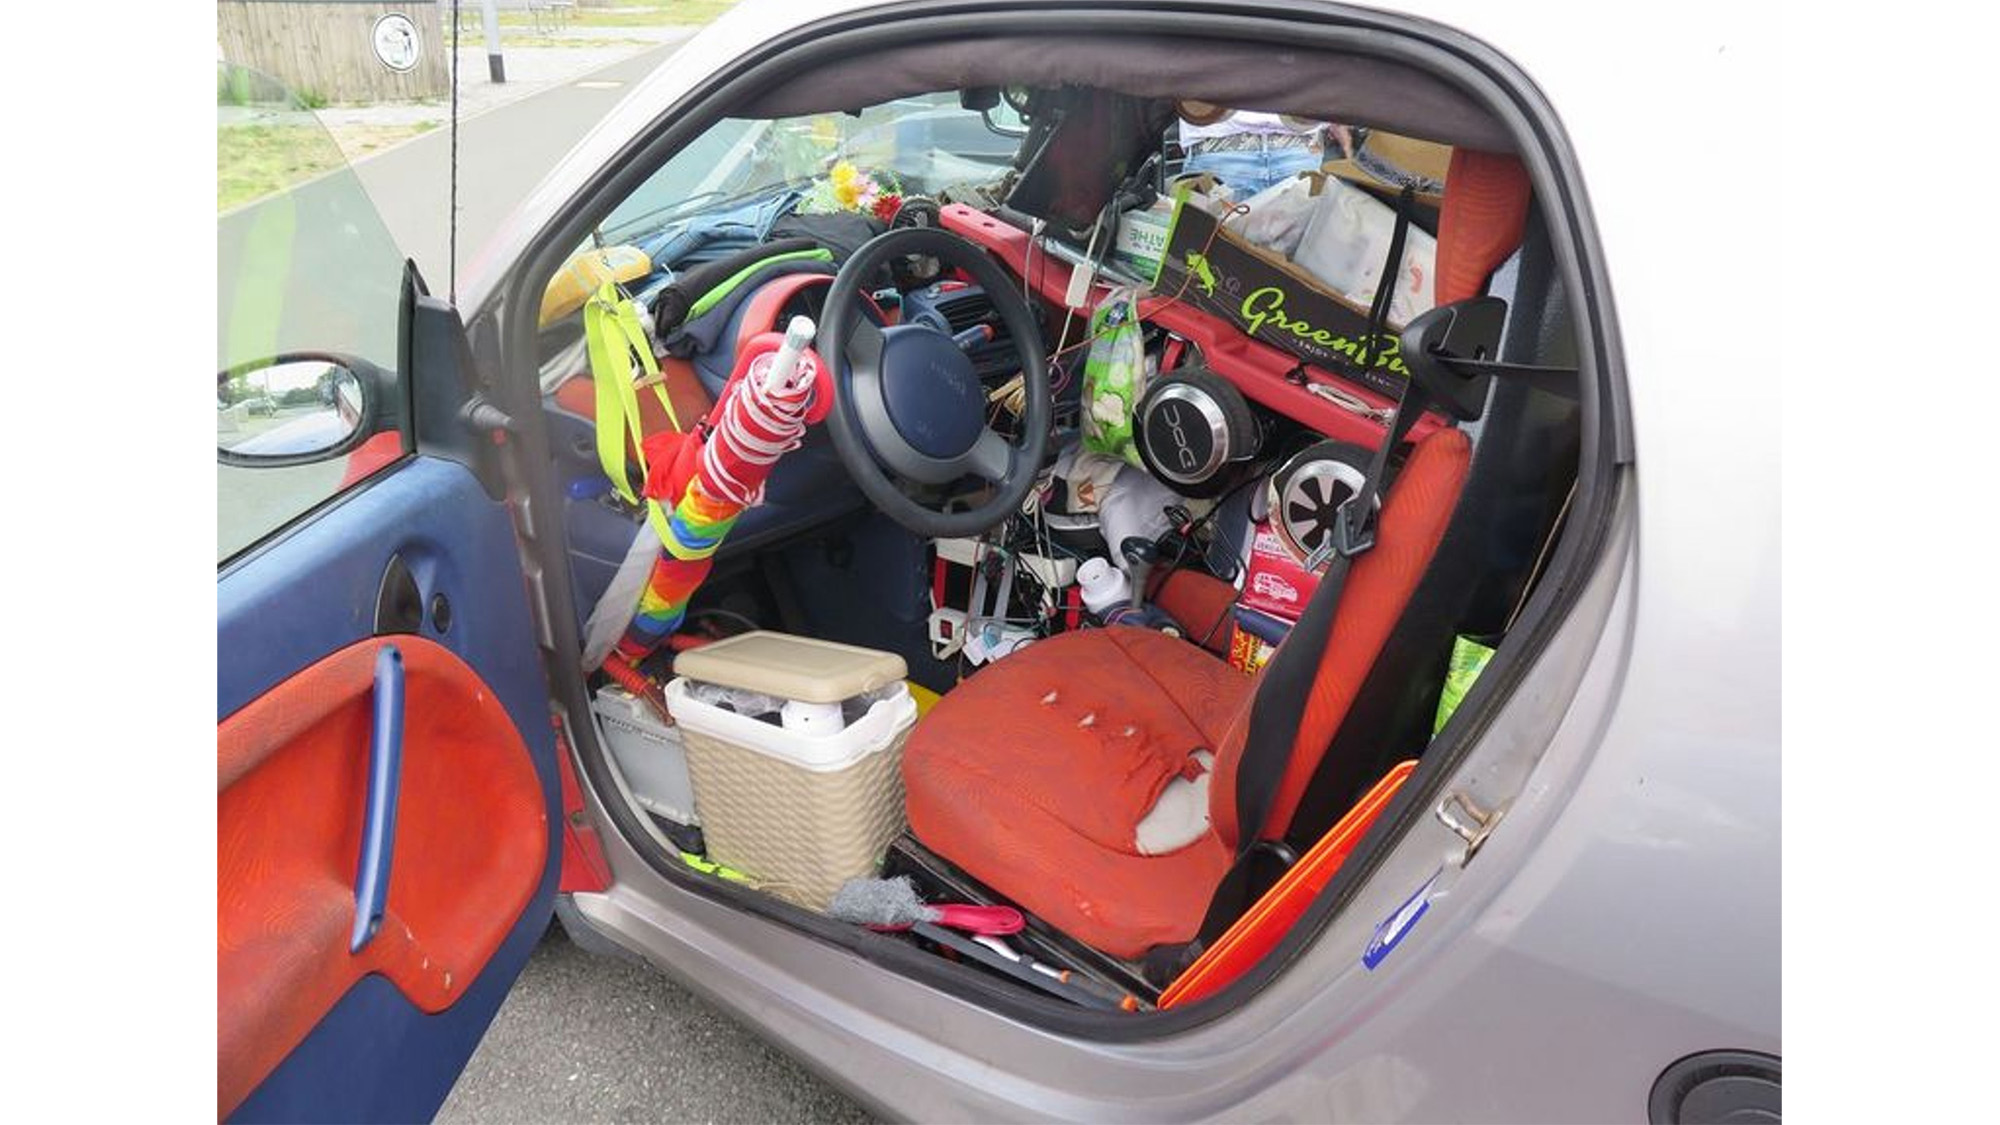 Read more about the article Cops Nab Tiny Smart Car Dangerously Packed With Goods